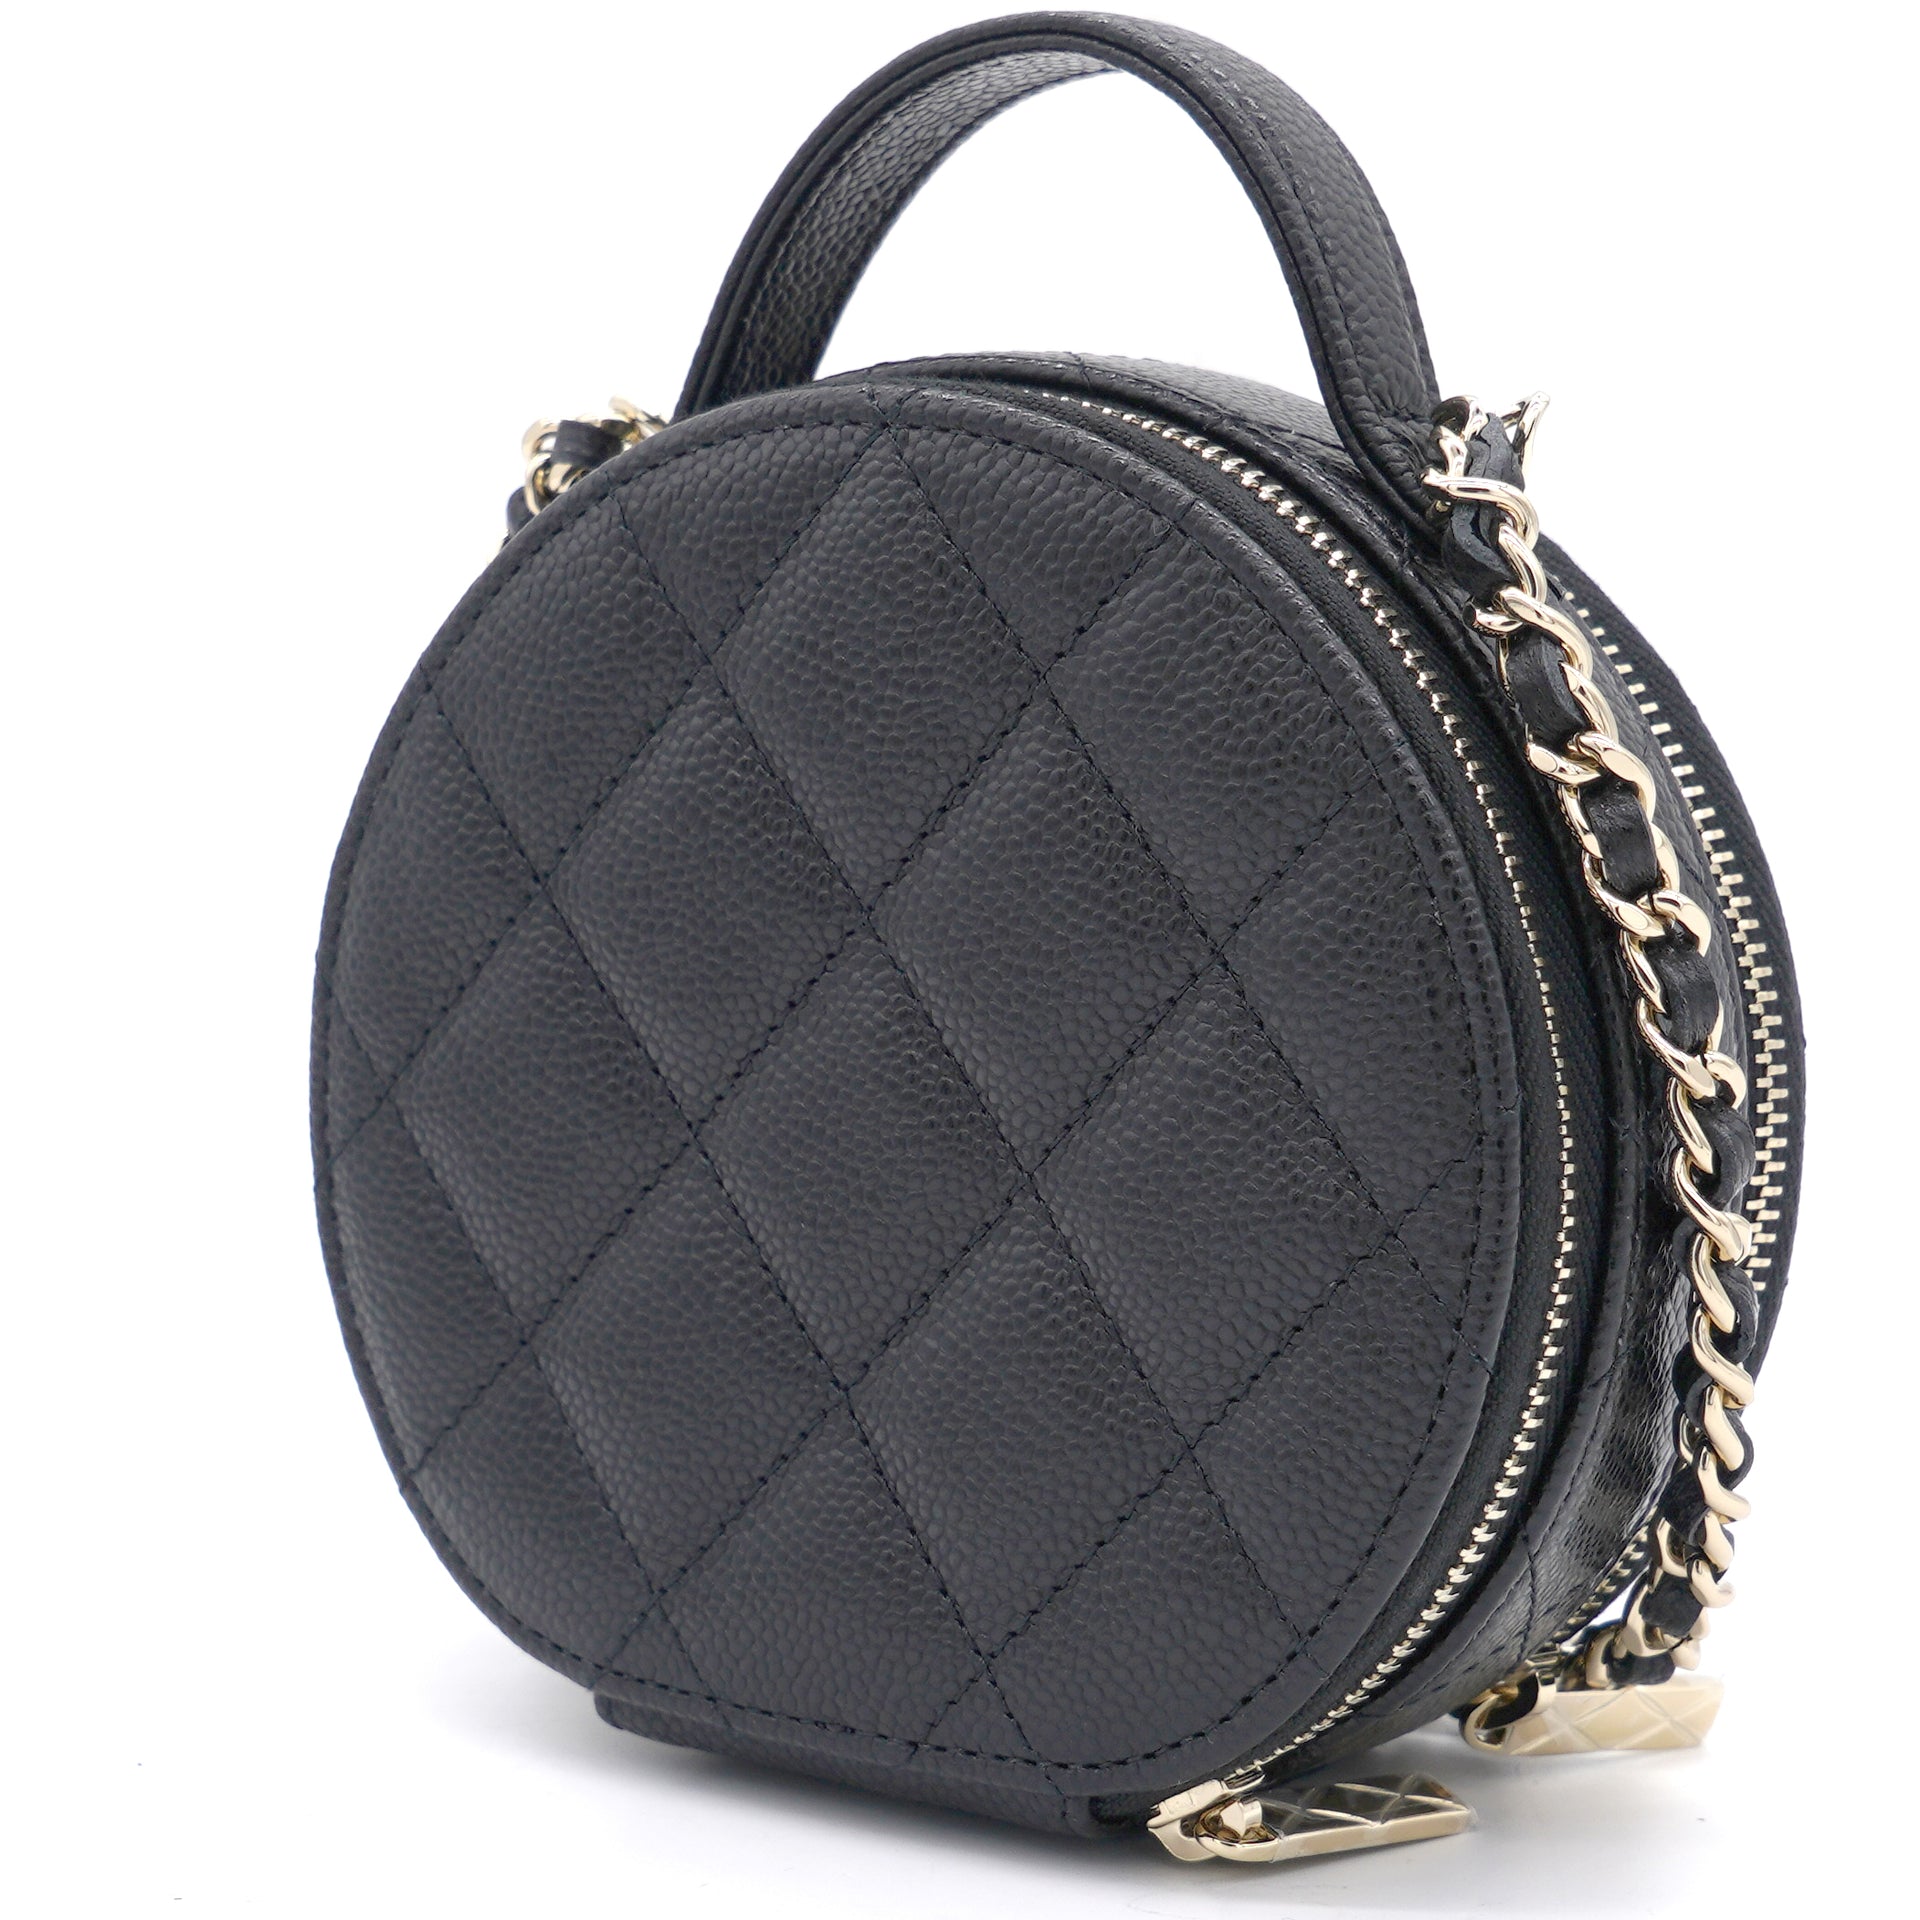 Buy Women Sling bags/Sling Purse. Cloud Sling bag with chain strap and with  a very soft fabric and trendy design (Black) at Amazon.in